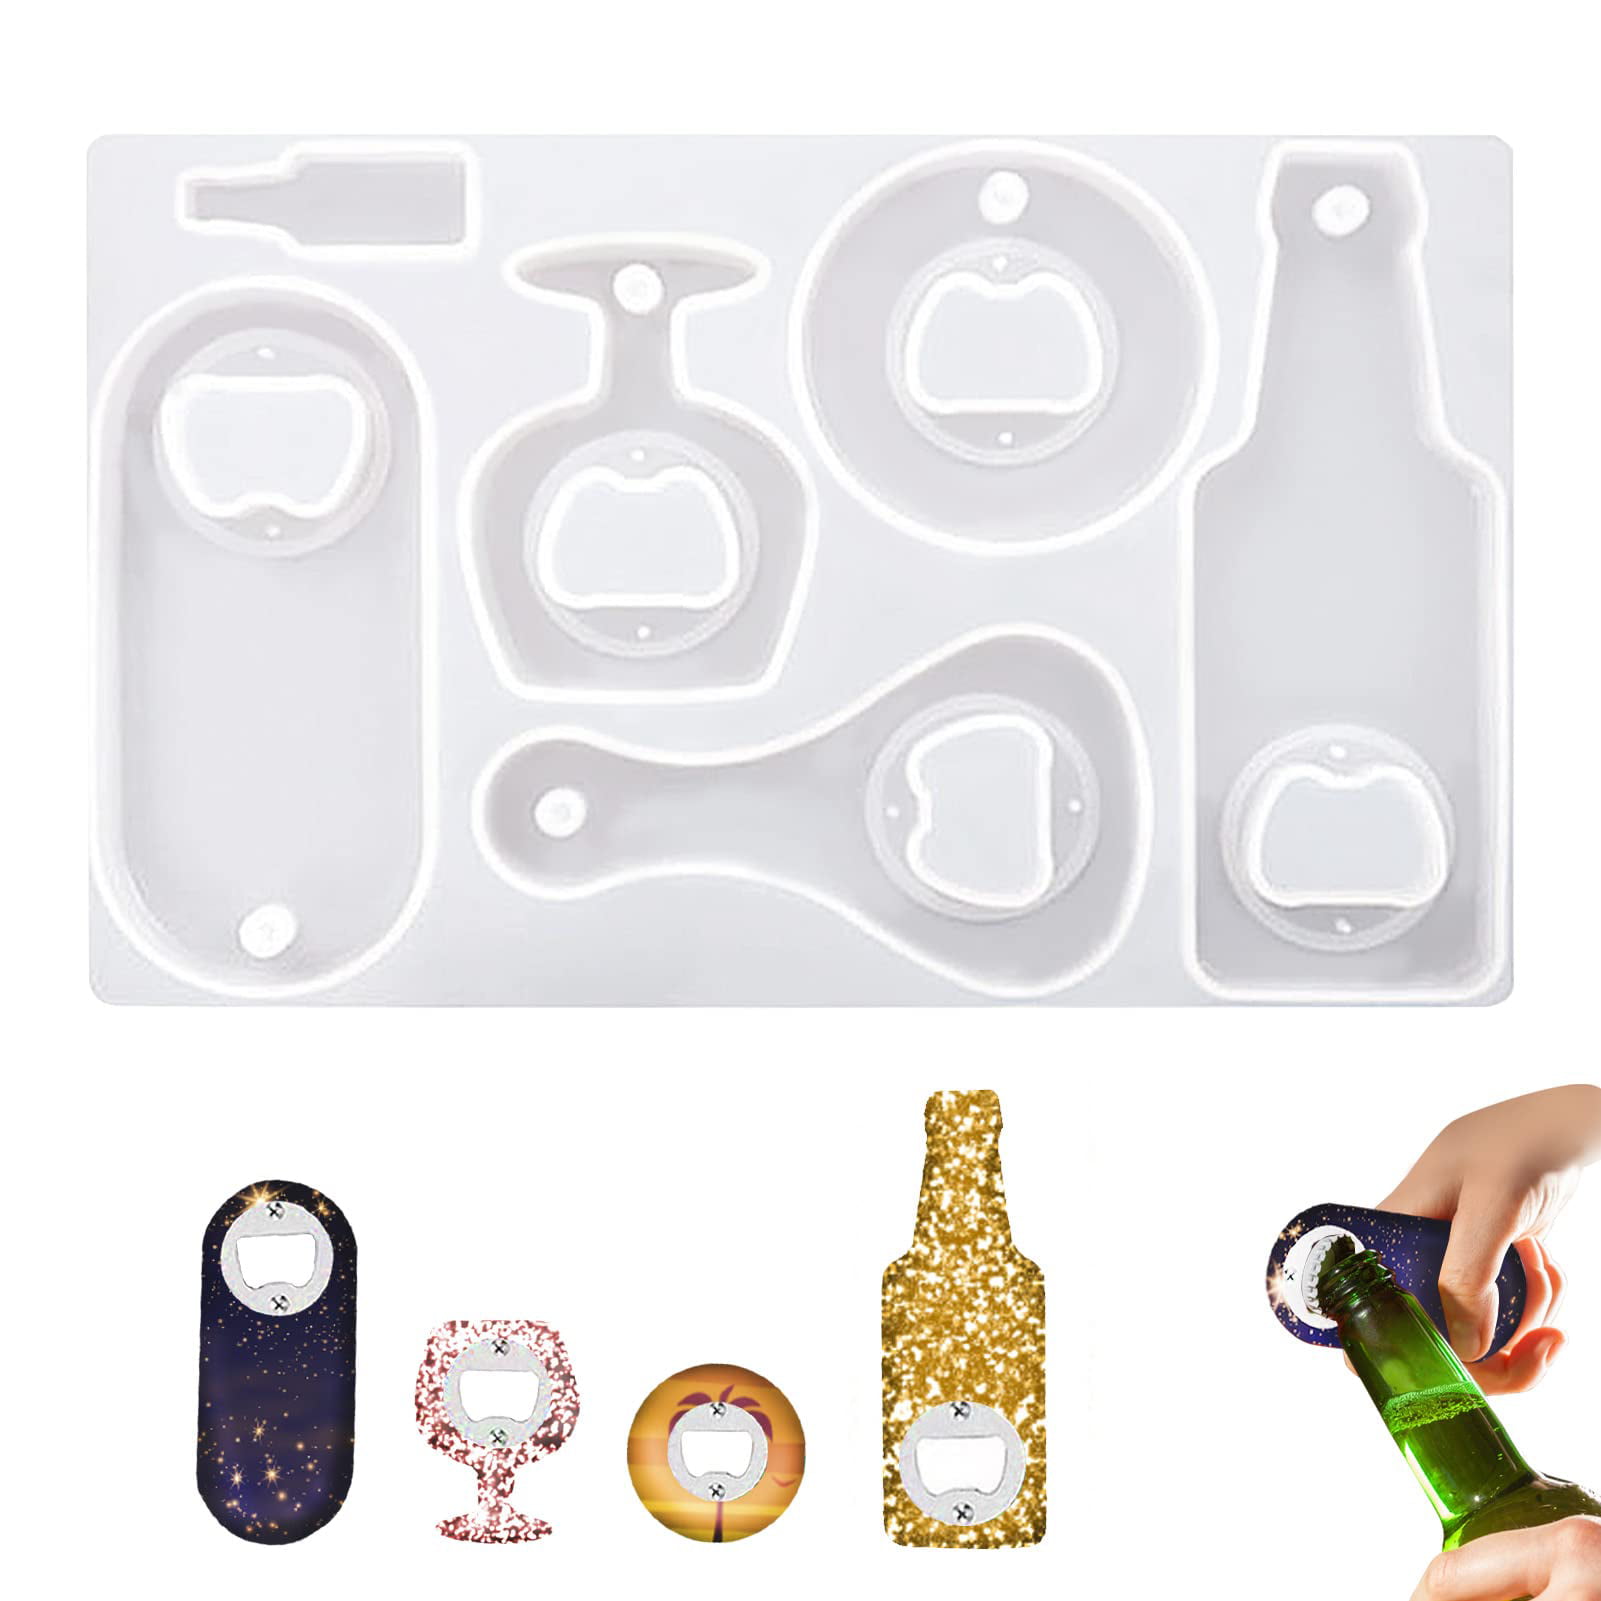 Hands DIY Glass Bottle Cutter Kit Stainless Steel Glass Bottle Cutting Machine Set Durable Bottle Cutter Tool DIY Craft Recycle Tool for Wine Beer